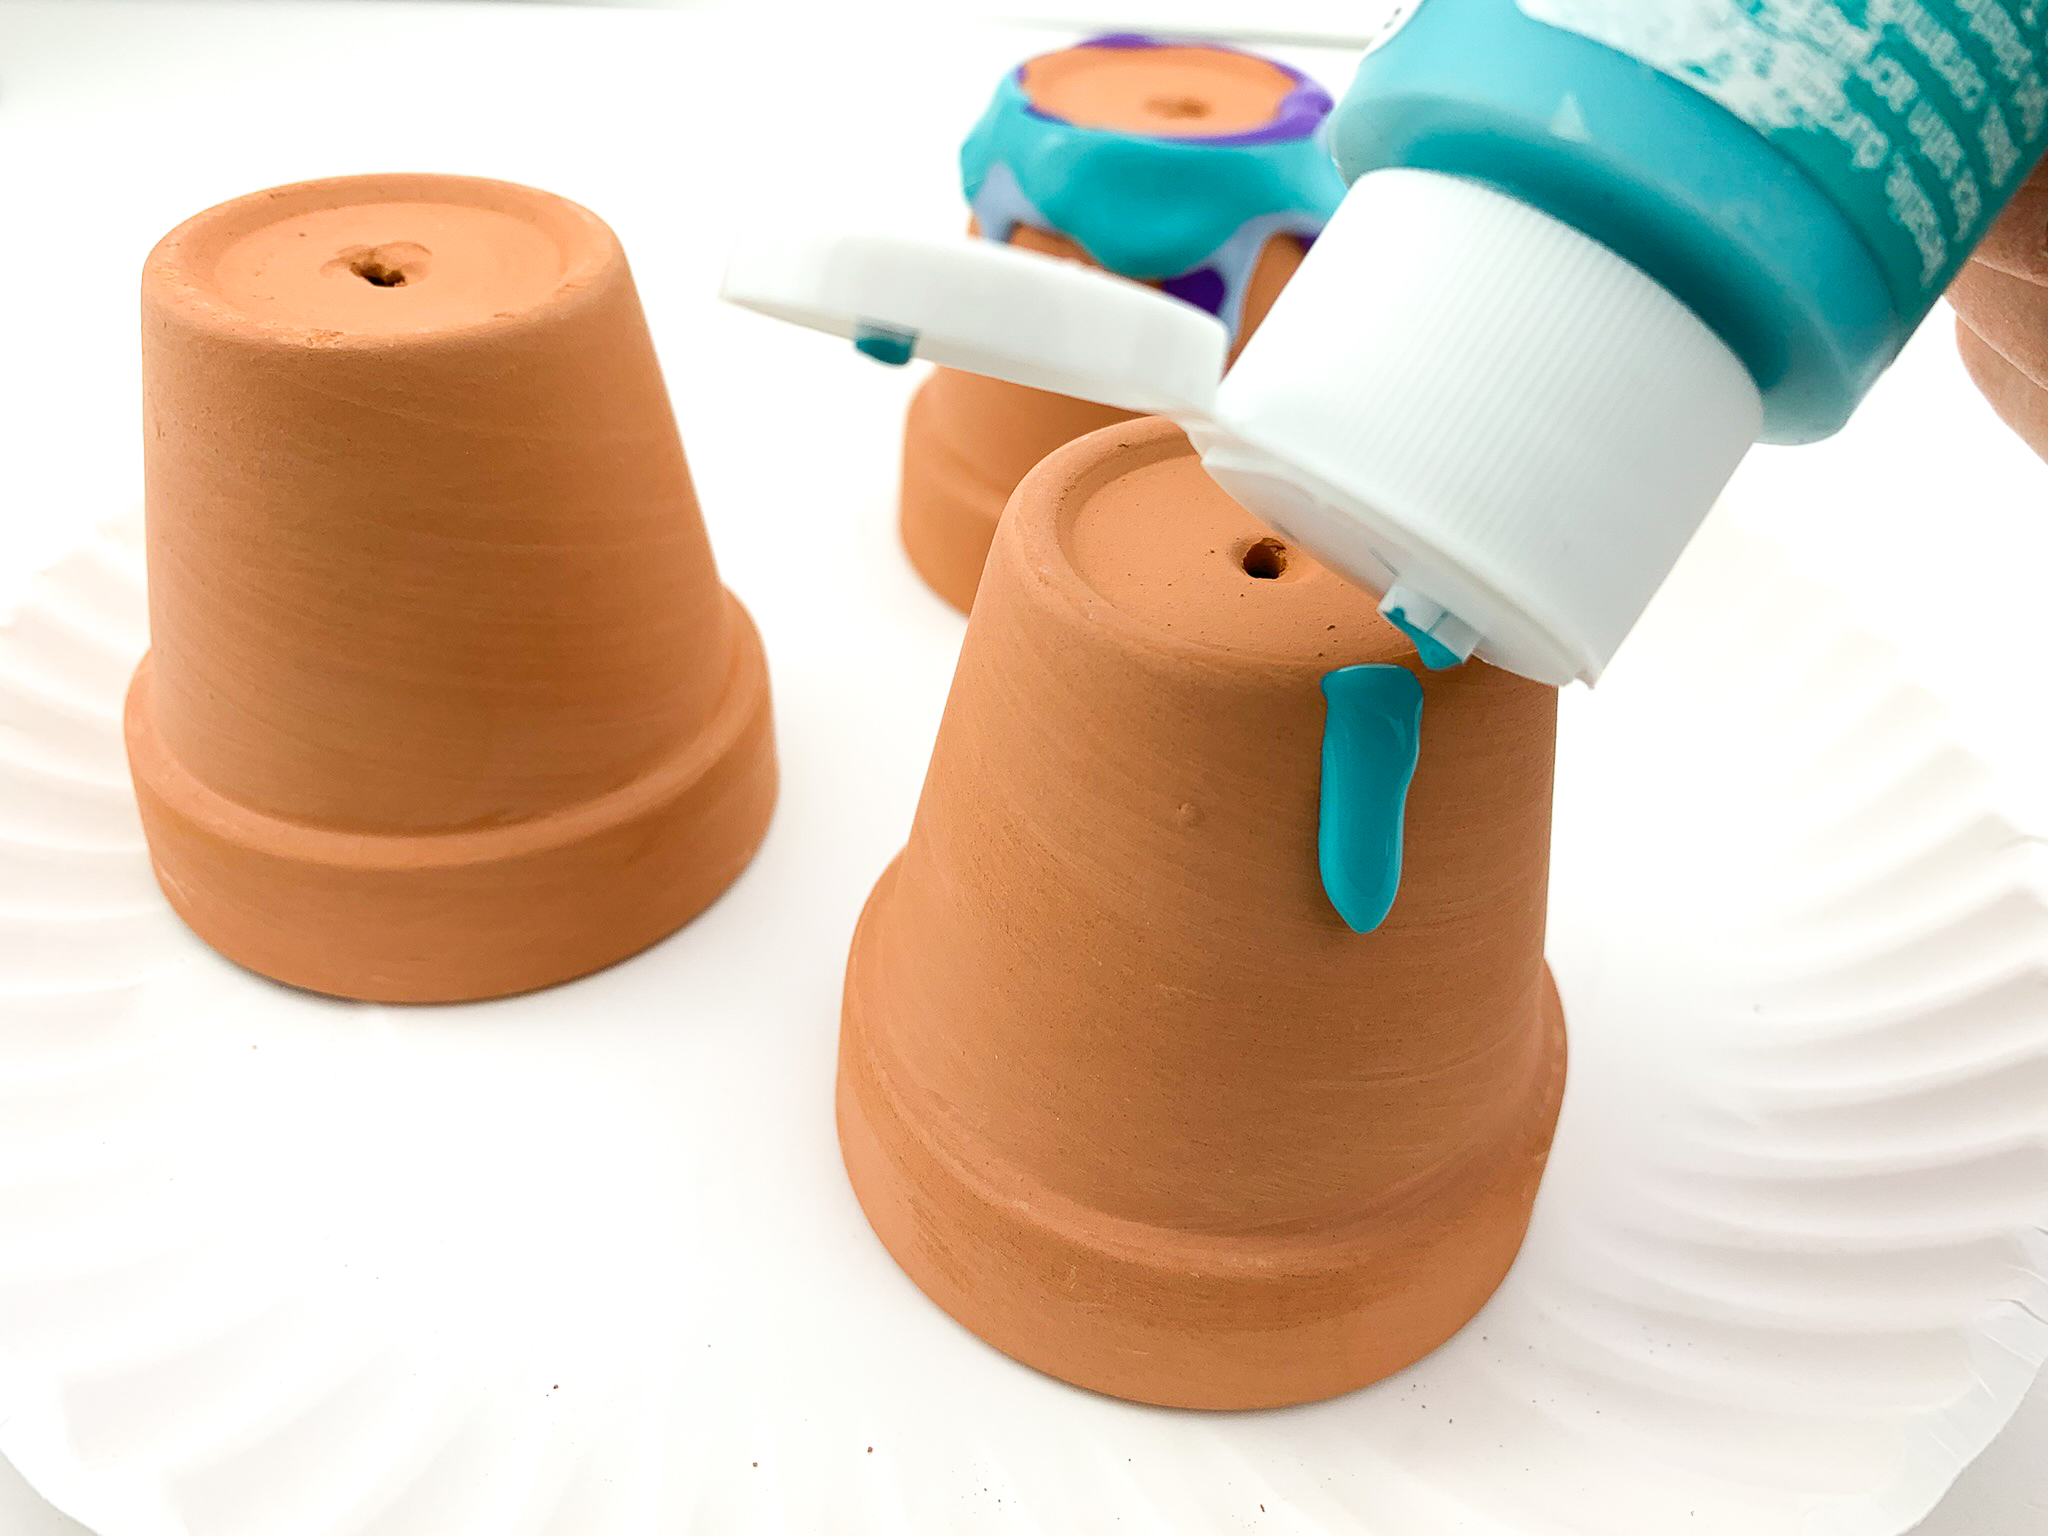 3 mini terracotta pots upside down on a paper plate. One is plain and one has 2 colors of blue and purple paint running down from the bottom. Someone is pouring blue paint from a bottle onto the third pot's bottom.